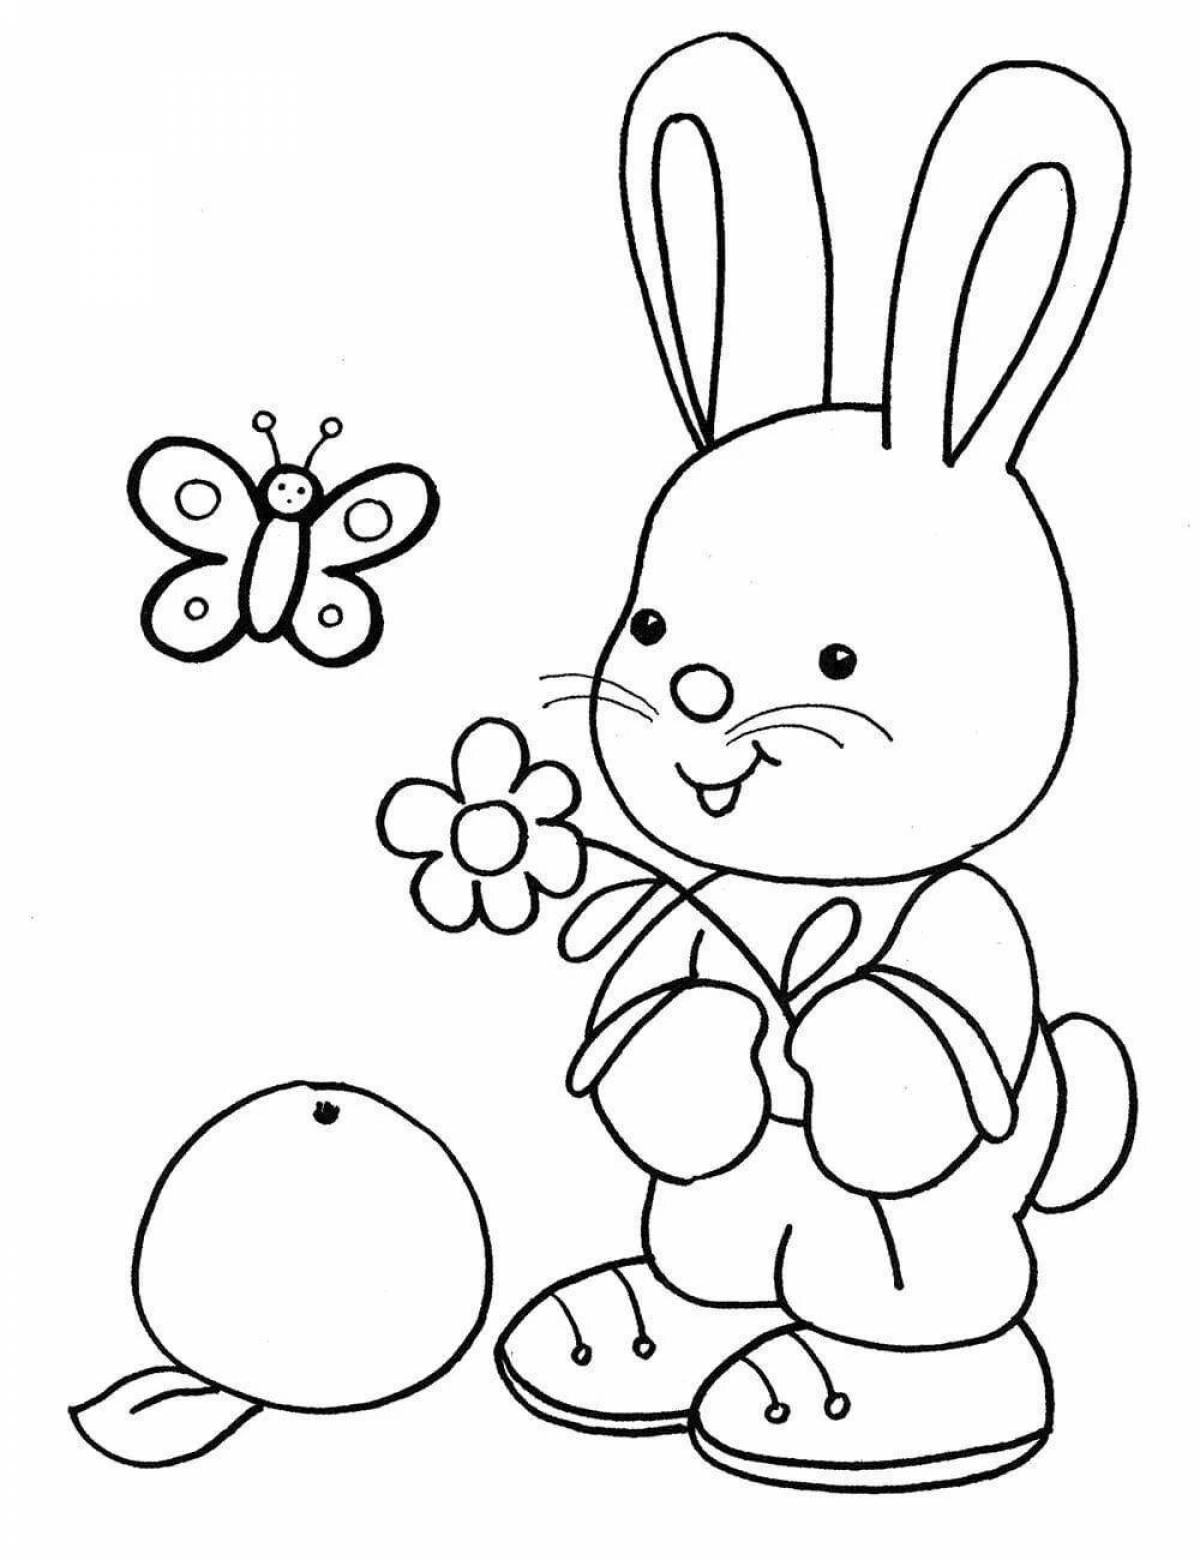 Creative coloring book for 3-4 year olds